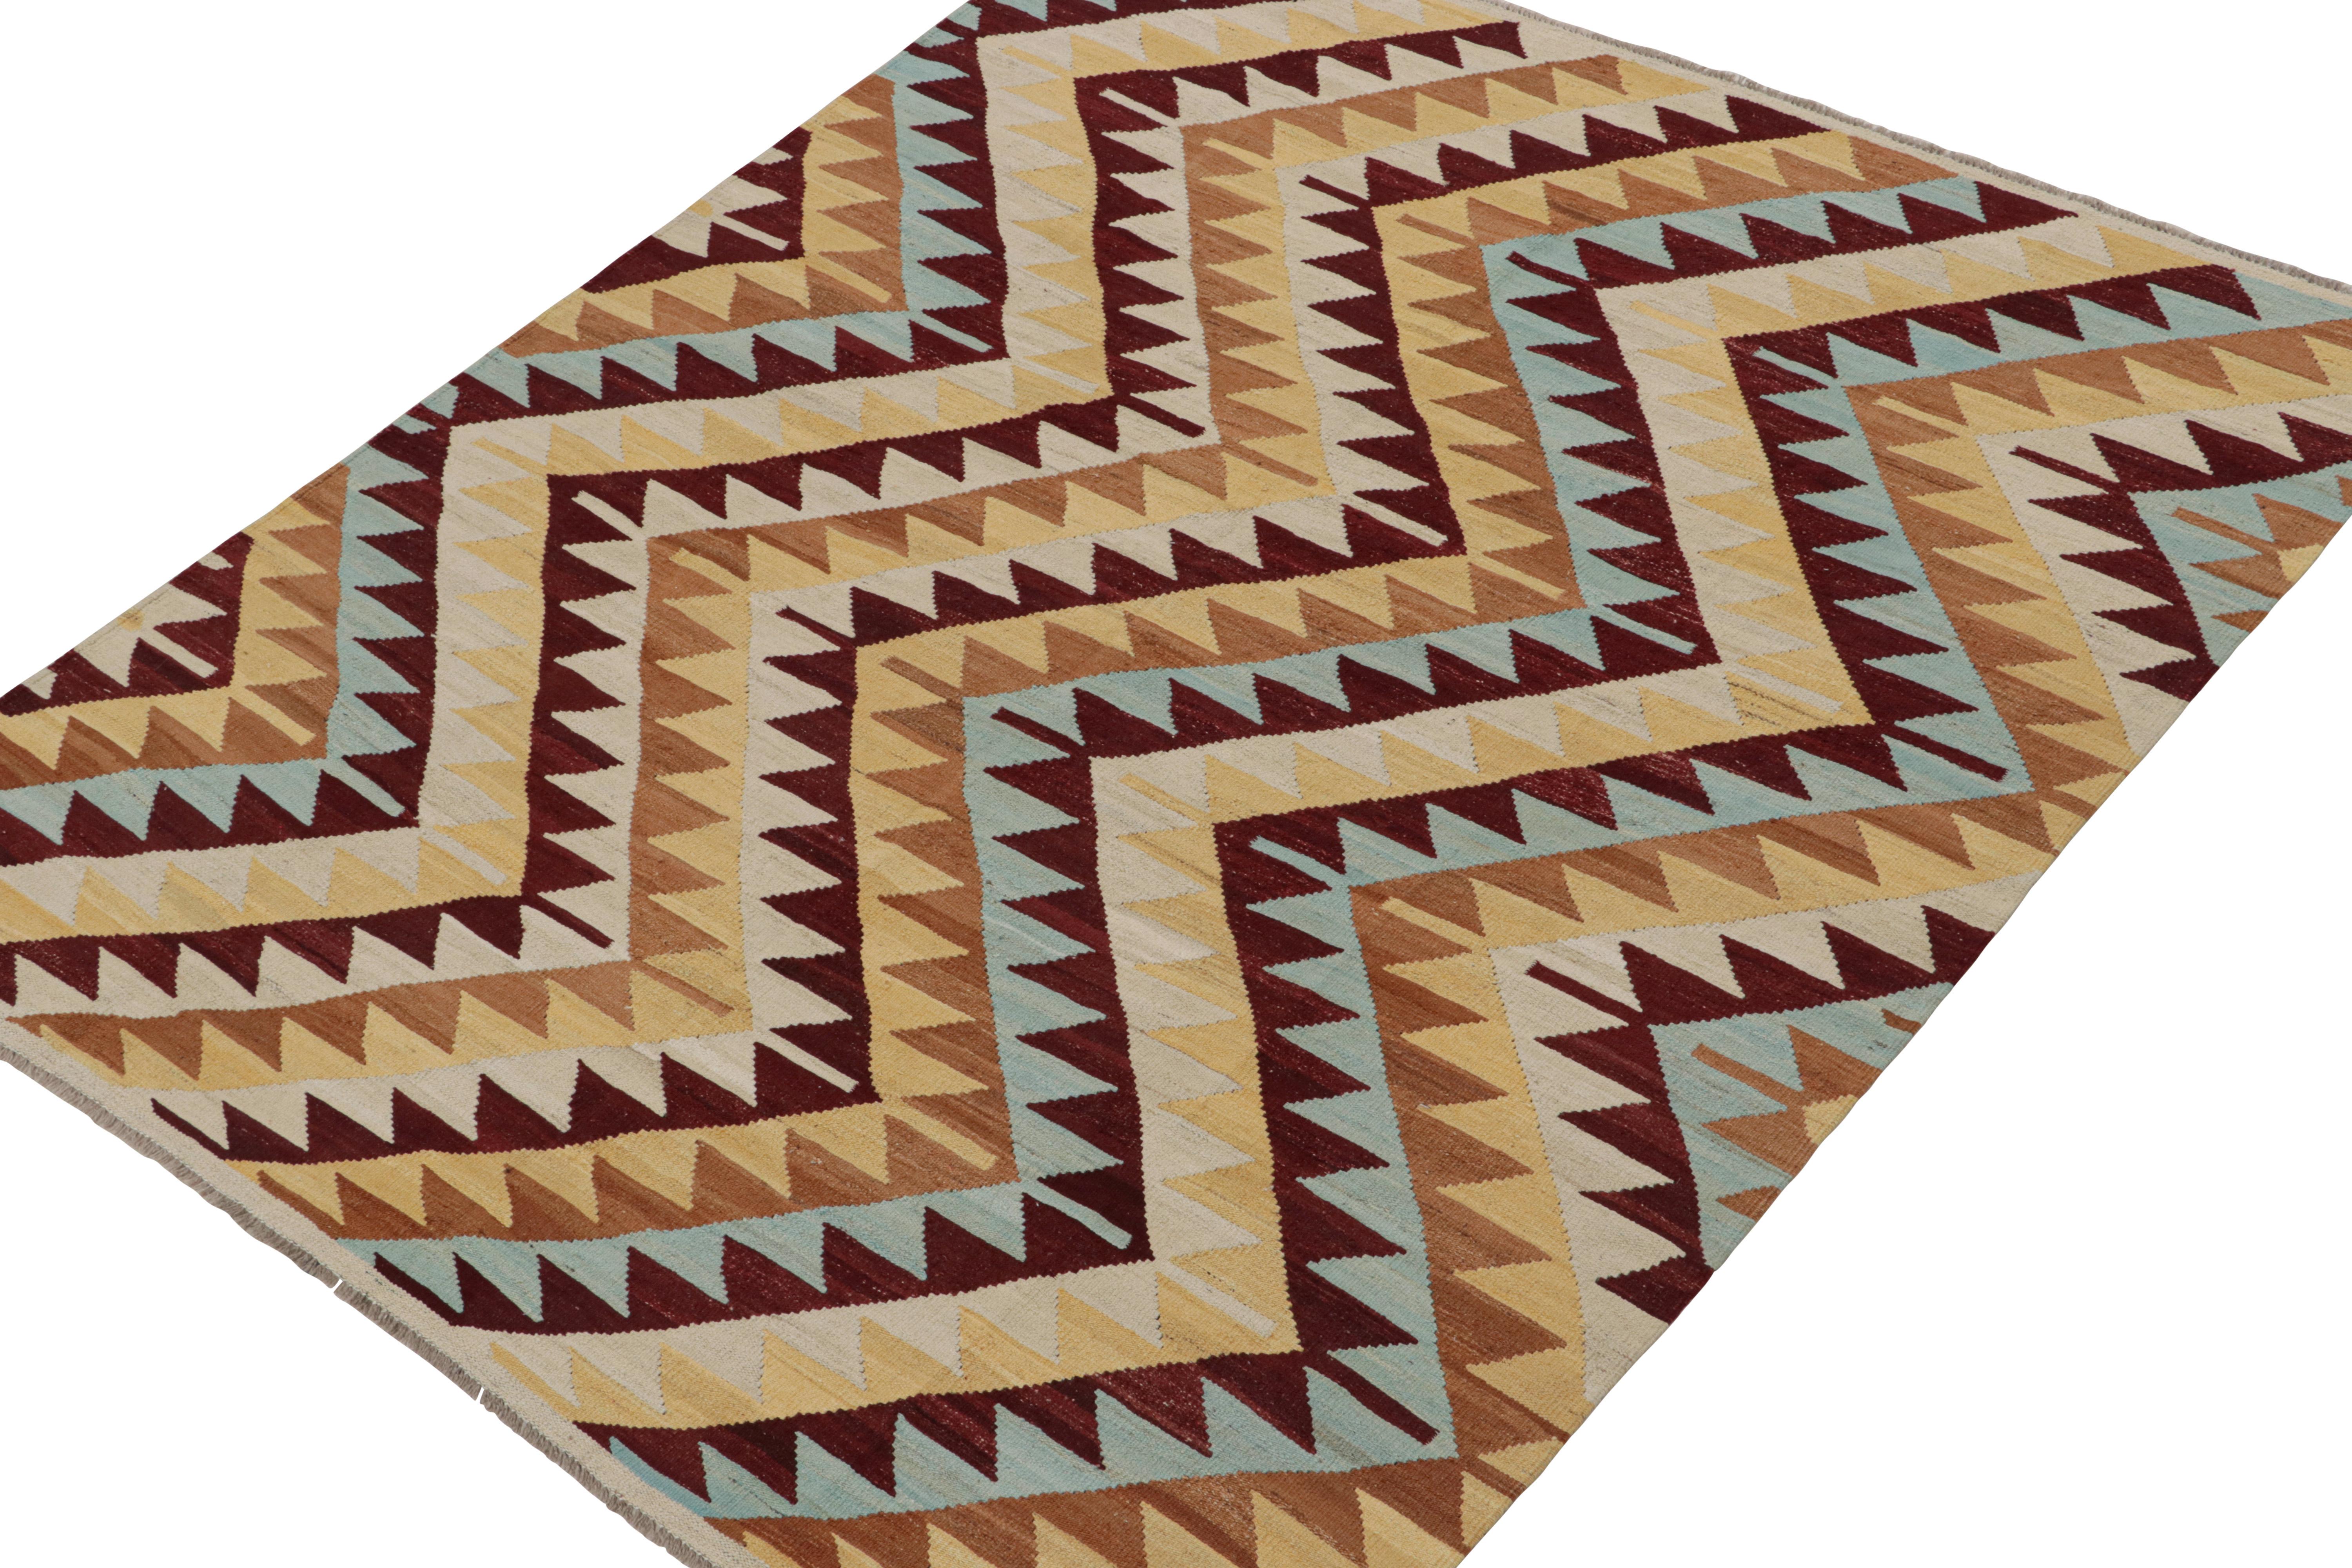 Hand-Knotted Rug & Kilim’s Tribal Style Kilim in Red, Blue and Beige-Brown Geometric Patterns For Sale